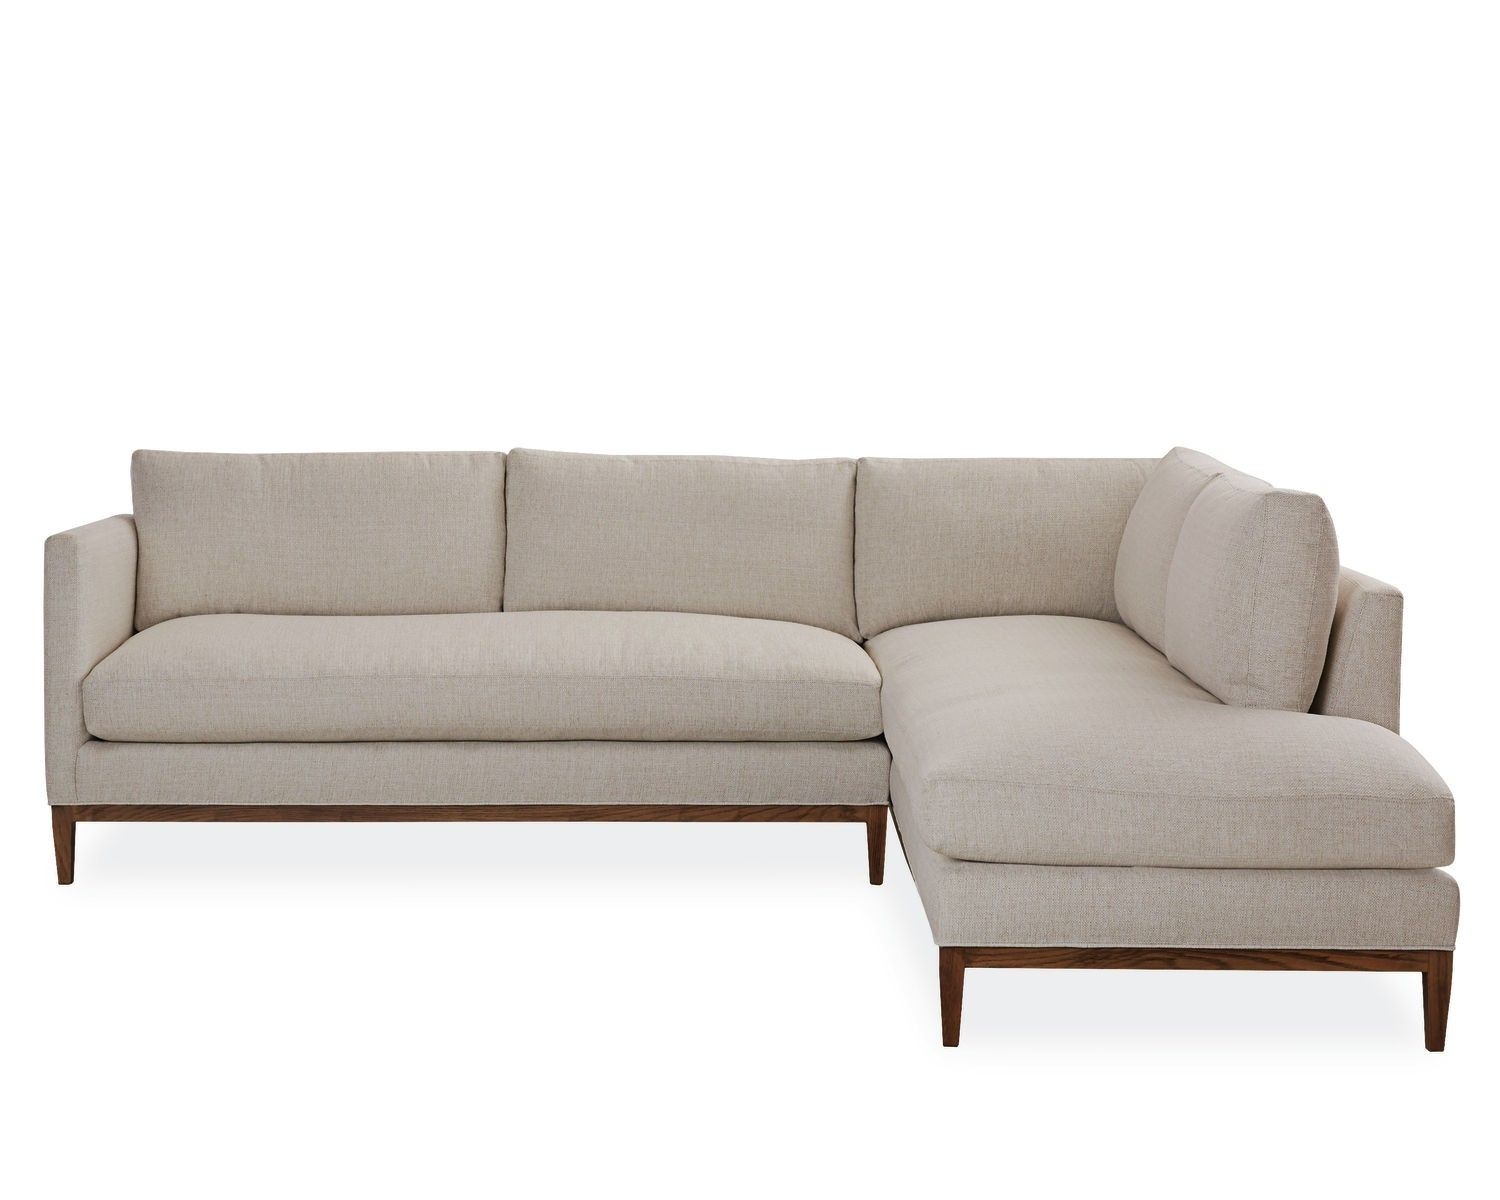 American Furniture | Palm Springs Chaise Sectional | Lee Industries Pertaining To Lee Industries Sectional Sofas (View 4 of 10)